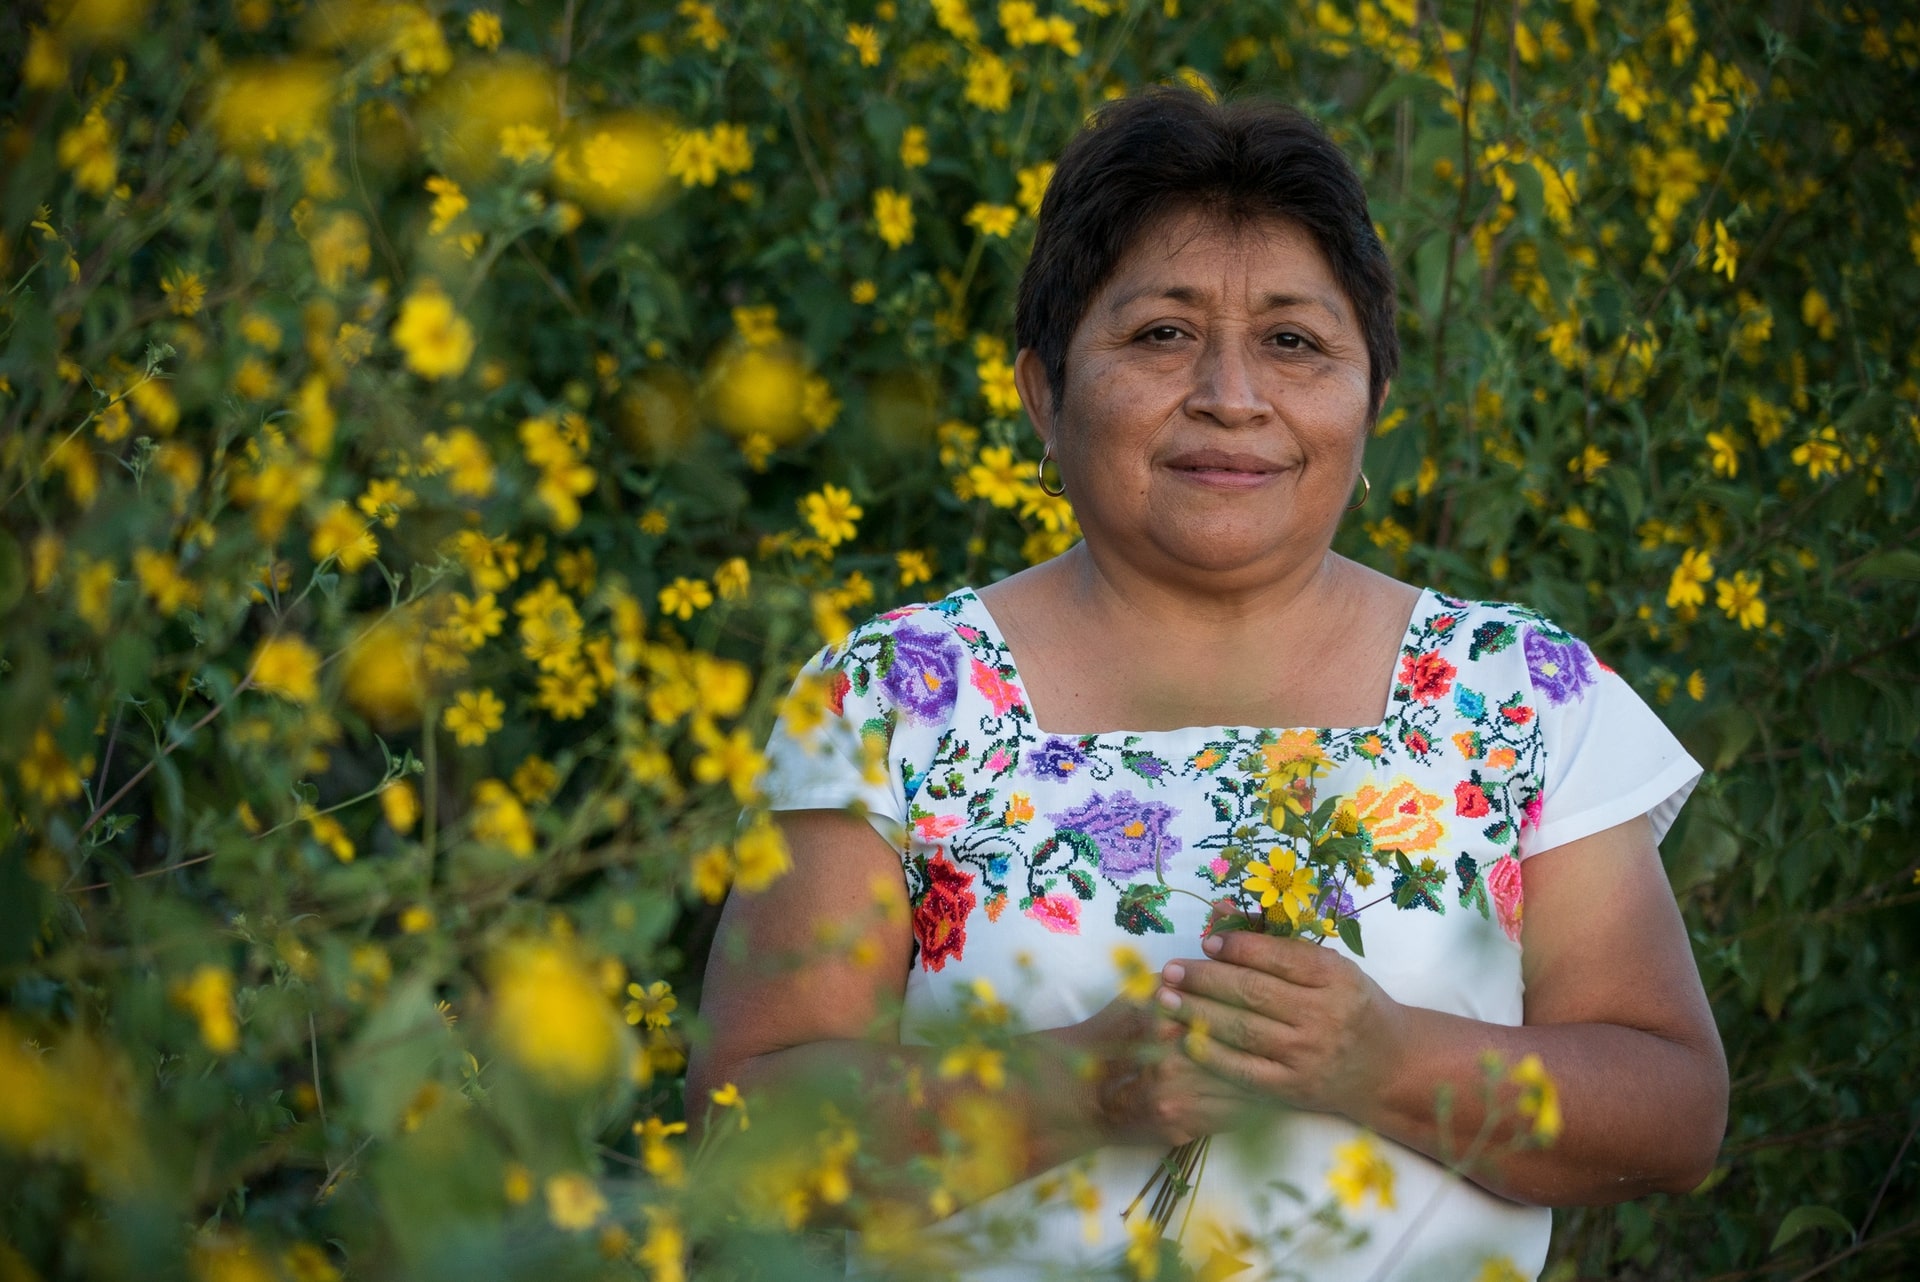 Leydy Pech is the indigenous Mayan beekeeper who led a coalition that successfully halted Monsanto’s planting of genetically modified soybeans in southern Mexico. Due to the relentless persistence of Pech and her coalition, in September 2017, Mexico’s Food and Agricultural Service revoked Monsanto’s permit to grow genetically modified soybeans in seven states. For this monumental feat of determination on behalf of her ancestral ecosystem, Leydy Pech was recently awarded the 2020 Goldman Environmental Prize for North America. Full story:?